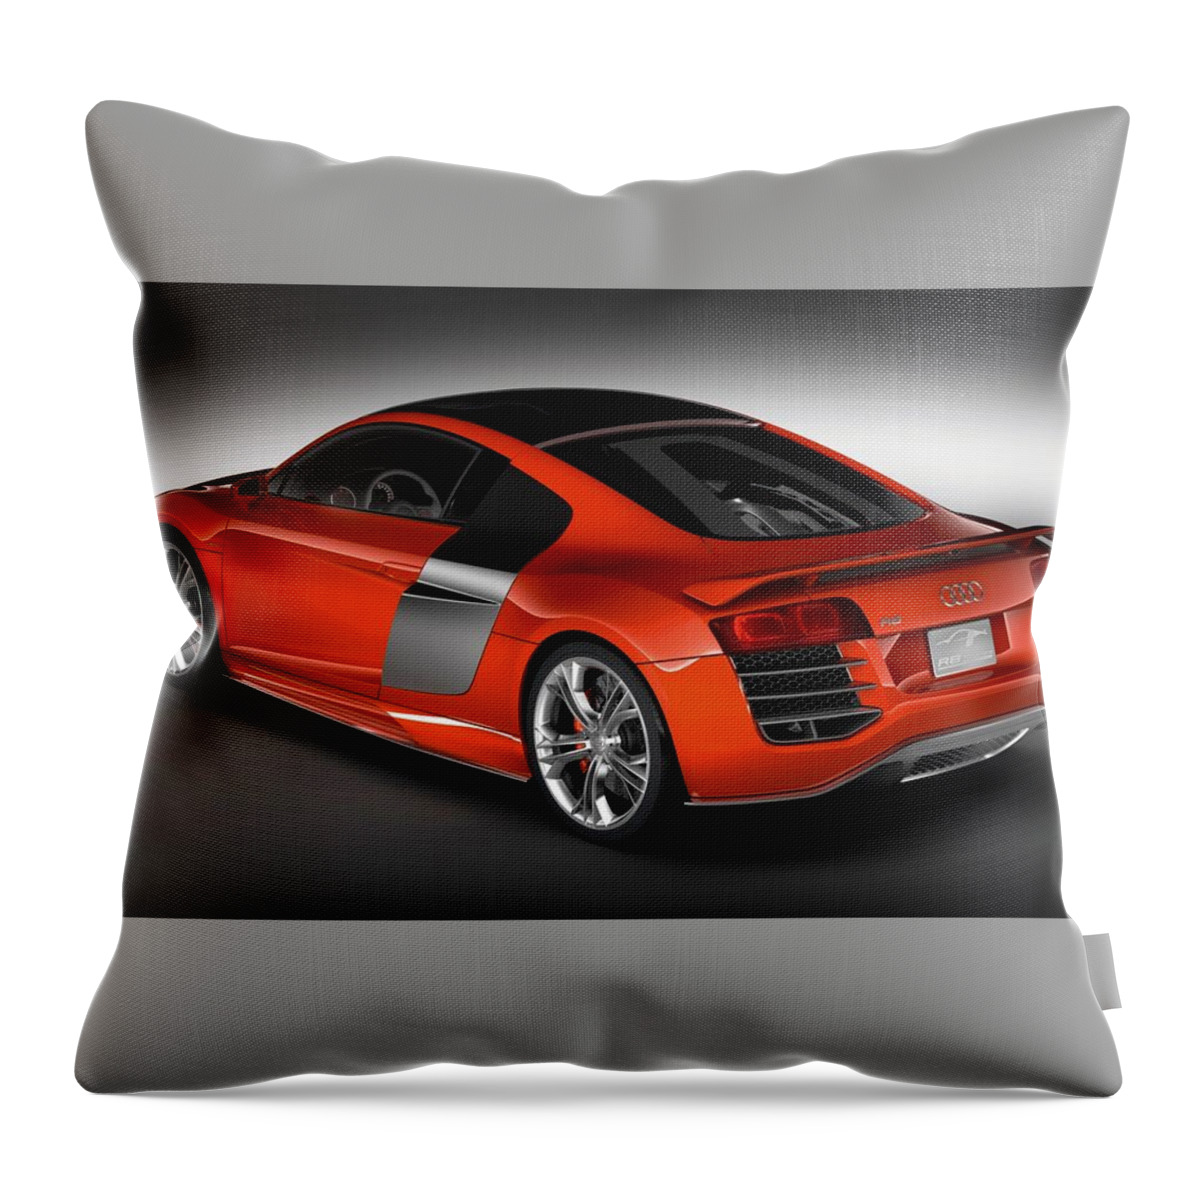 Audi Throw Pillow featuring the digital art Audi by Super Lovely